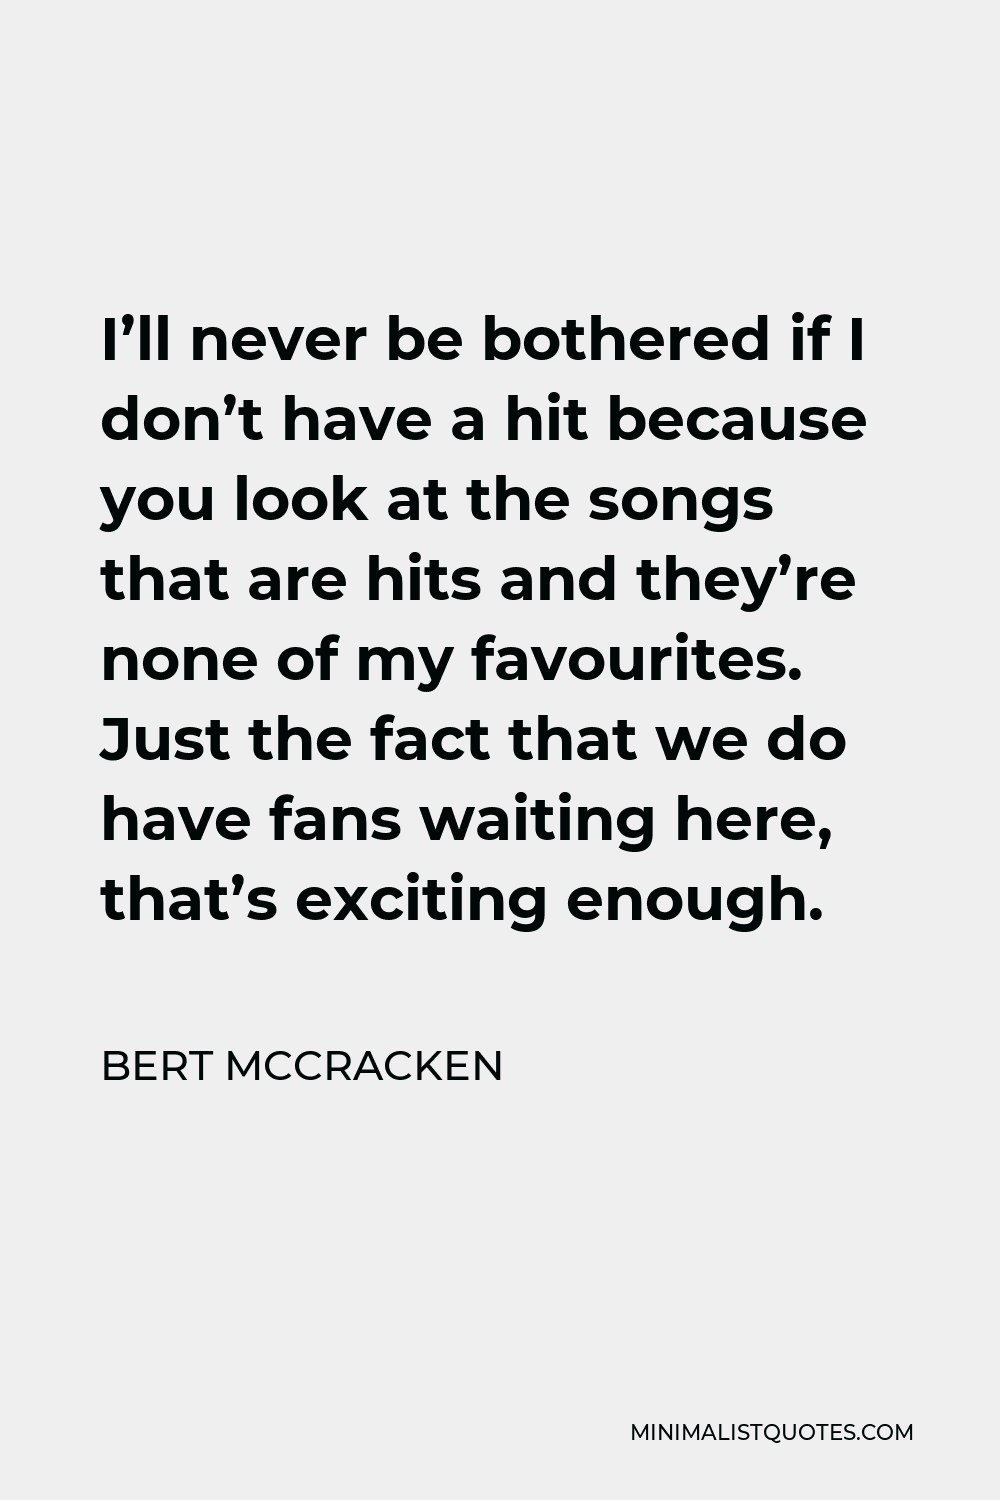 Bert McCracken Quote - I’ll never be bothered if I don’t have a hit because you look at the songs that are hits and they’re none of my favourites. Just the fact that we do have fans waiting here, that’s exciting enough.